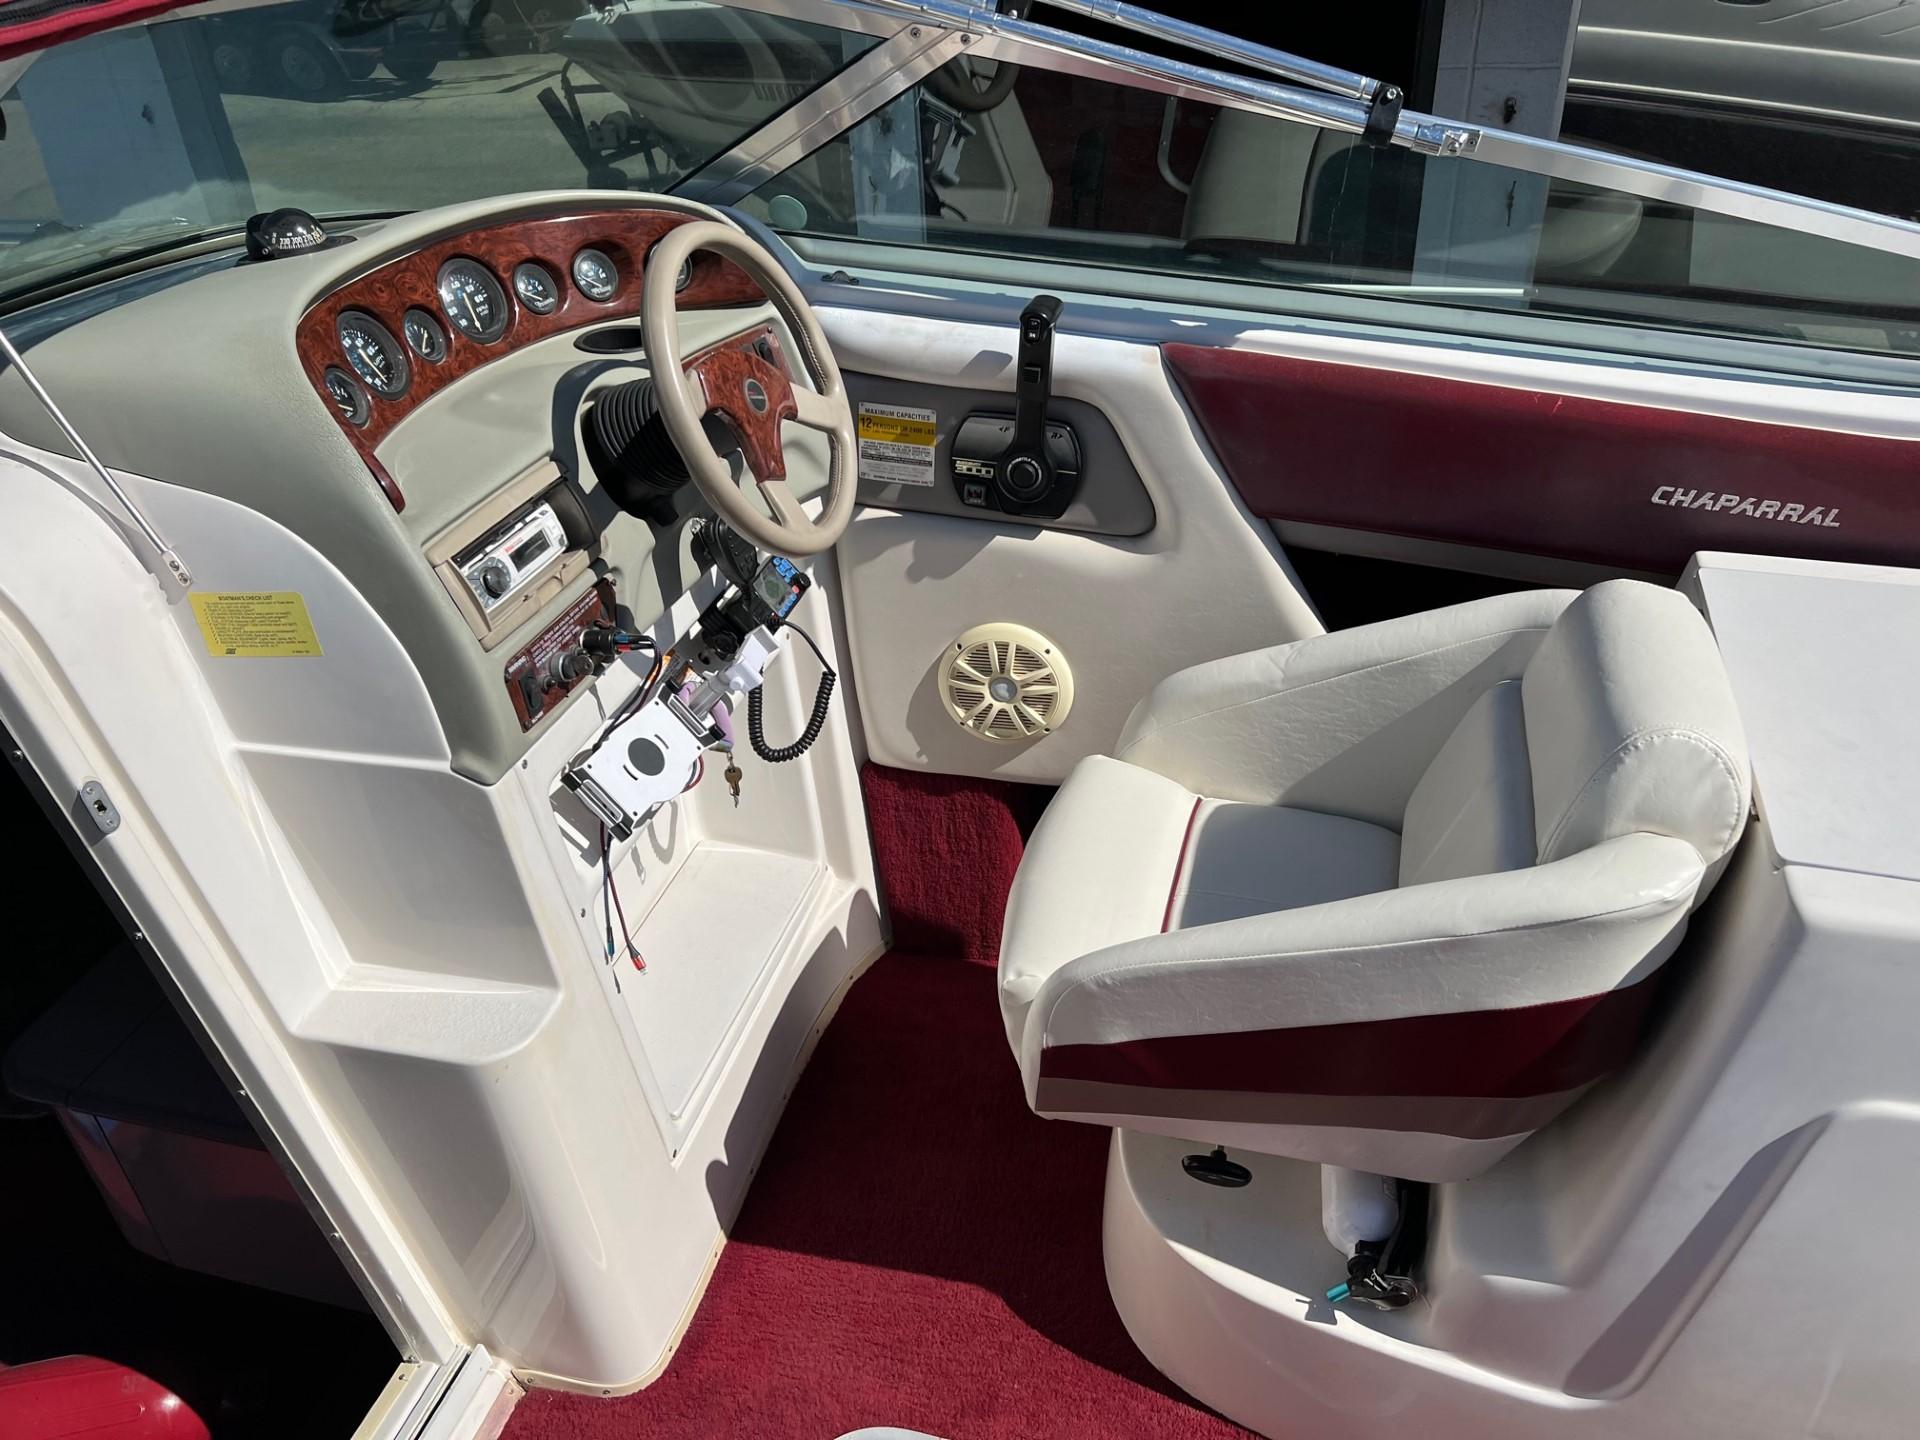 1996 Chaparral 2335 Limited Cuddy